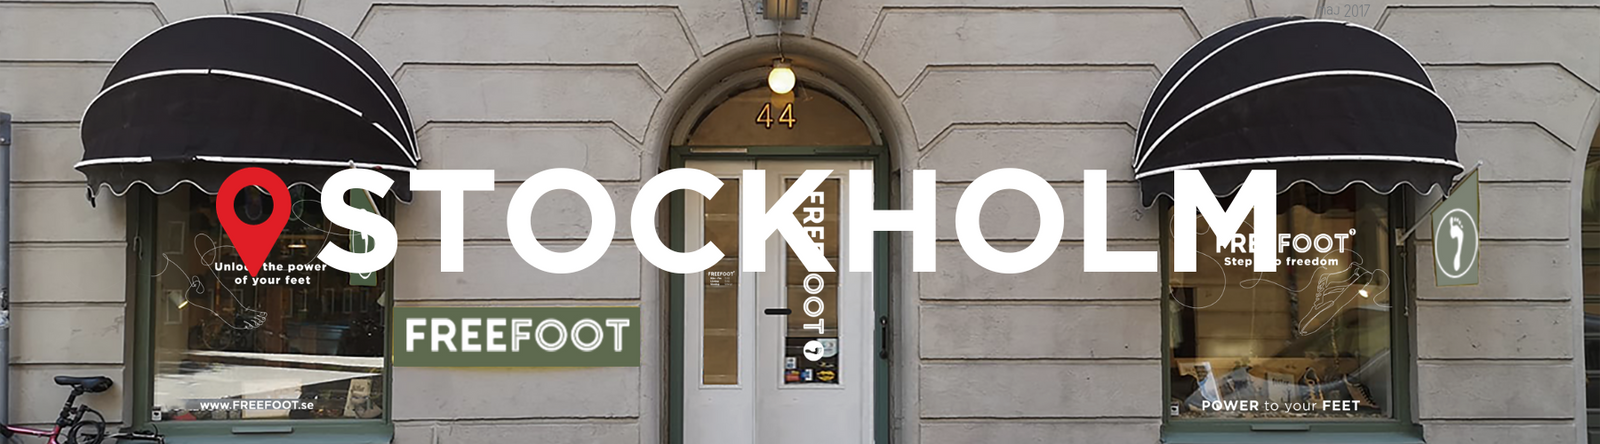 Guide to the best shoe shops in Stockholm - 13 best shoe stores